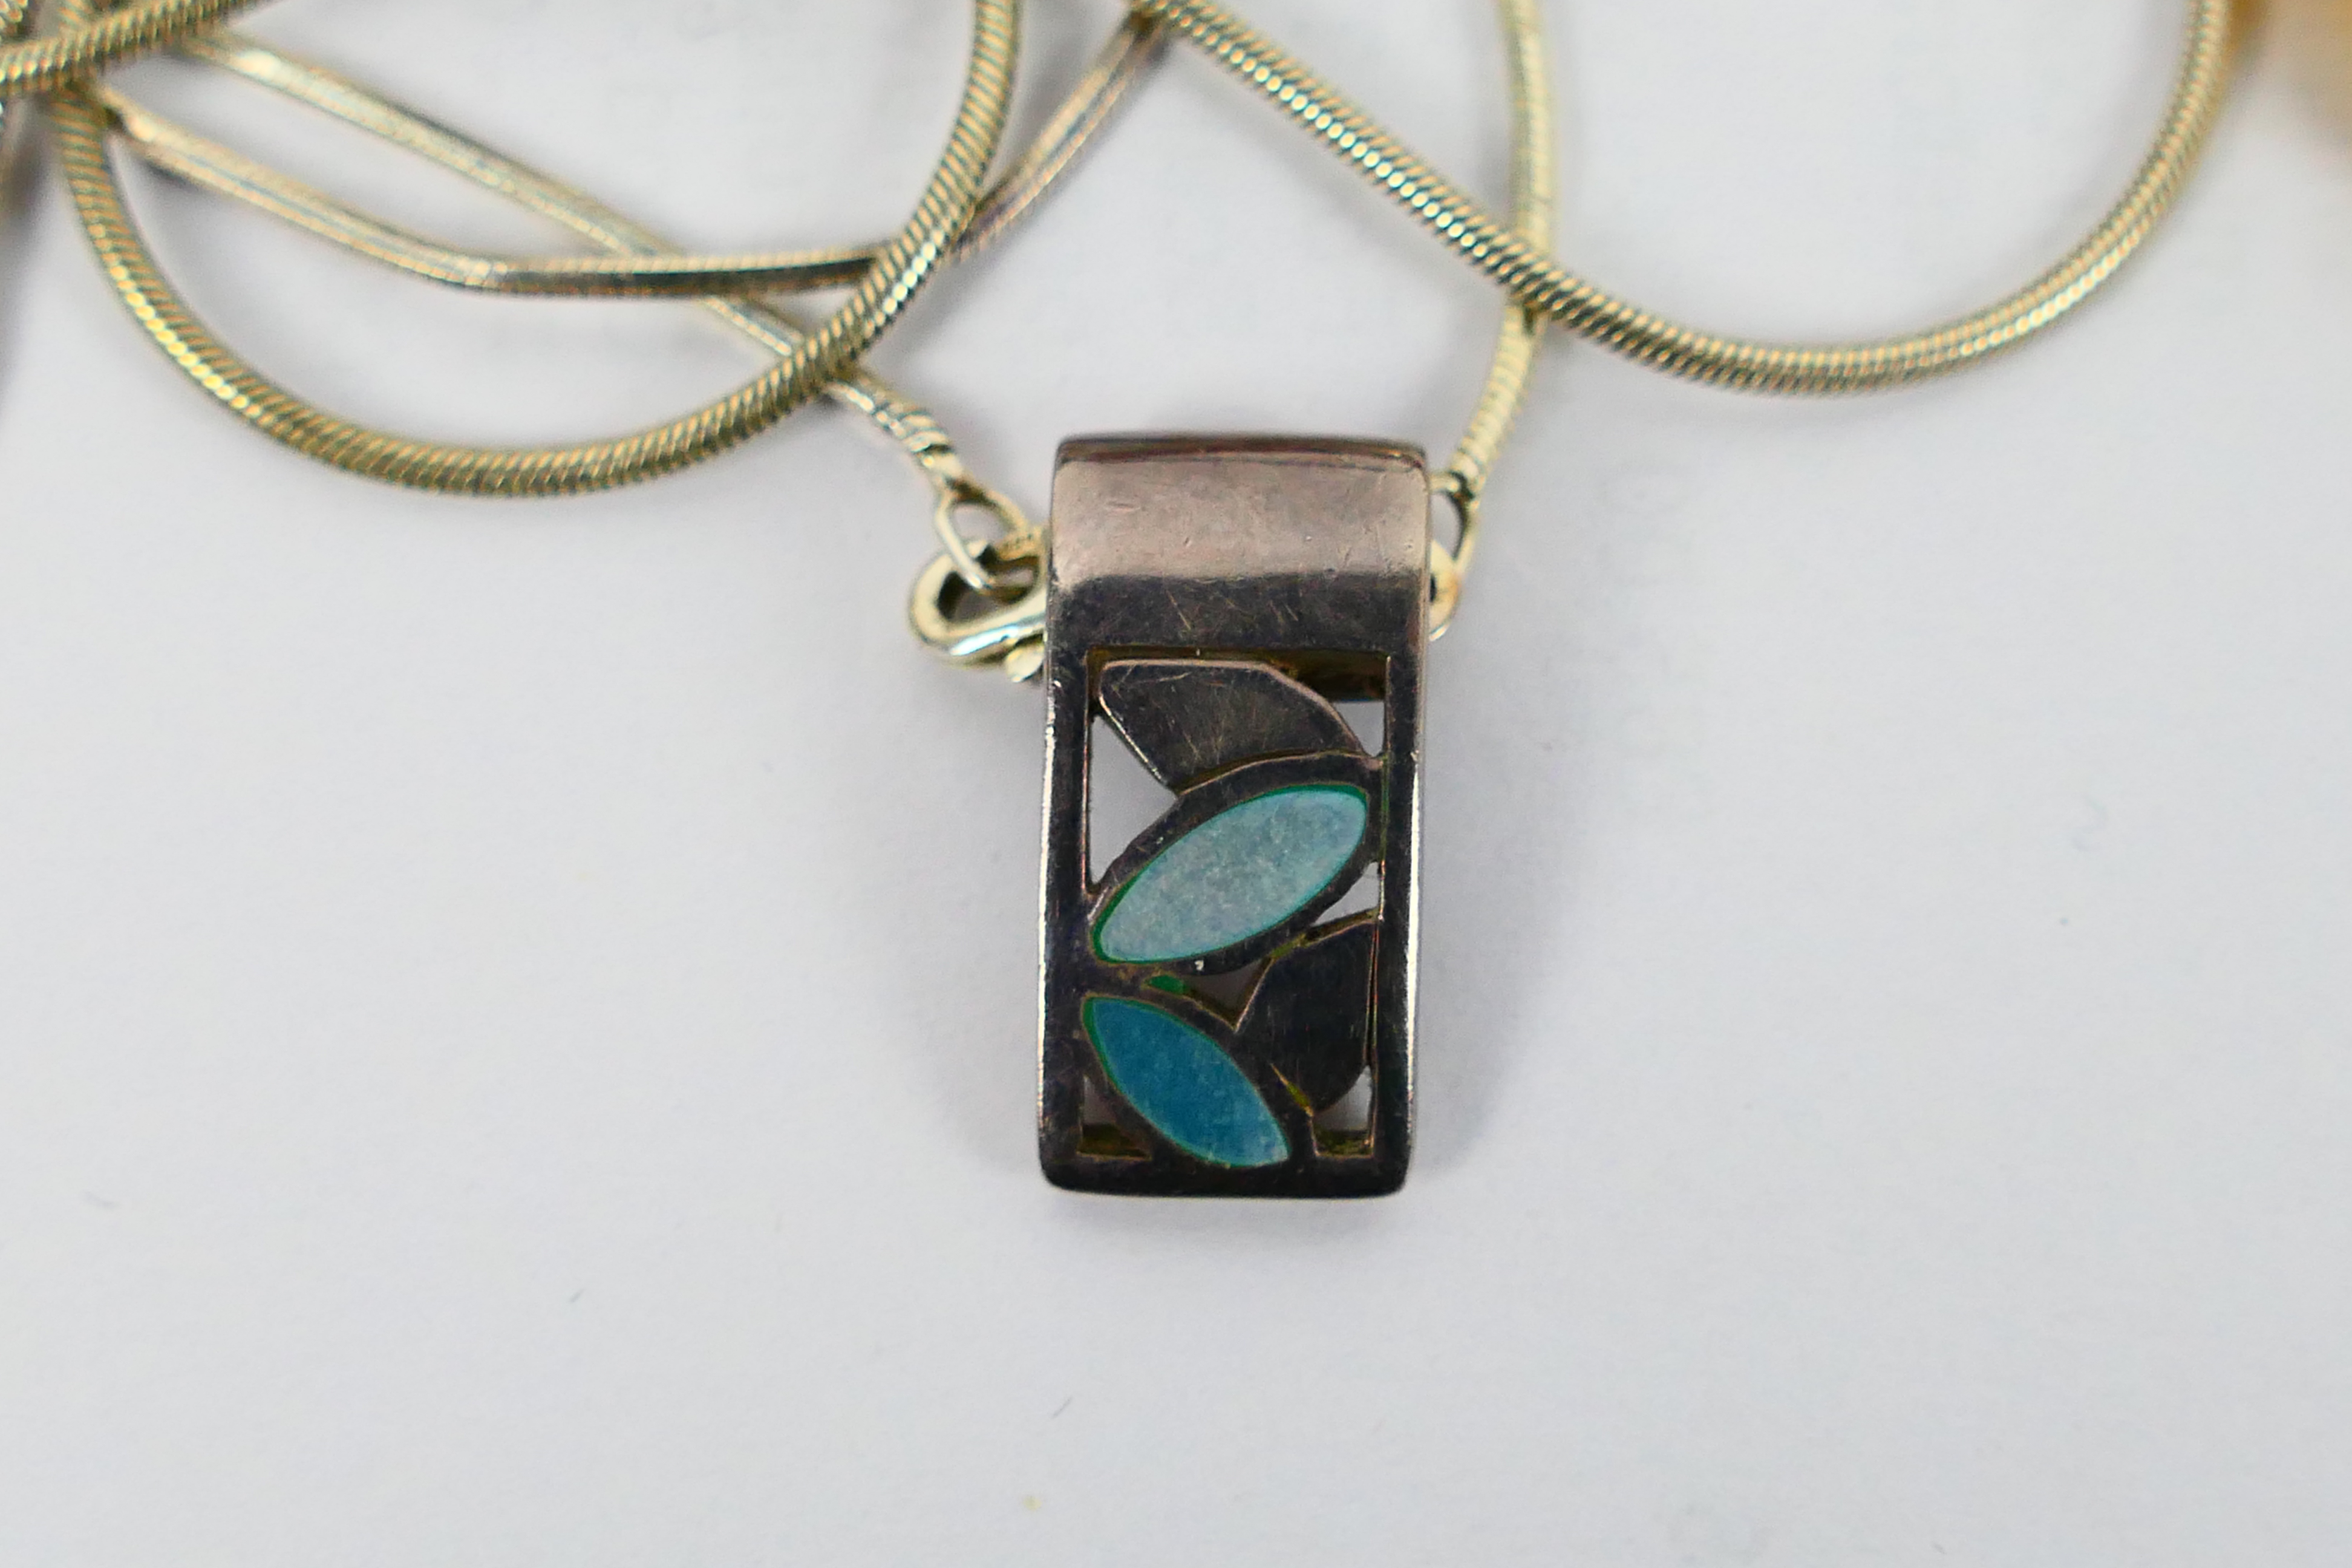 A collection of necklaces and pendants, - Image 6 of 6